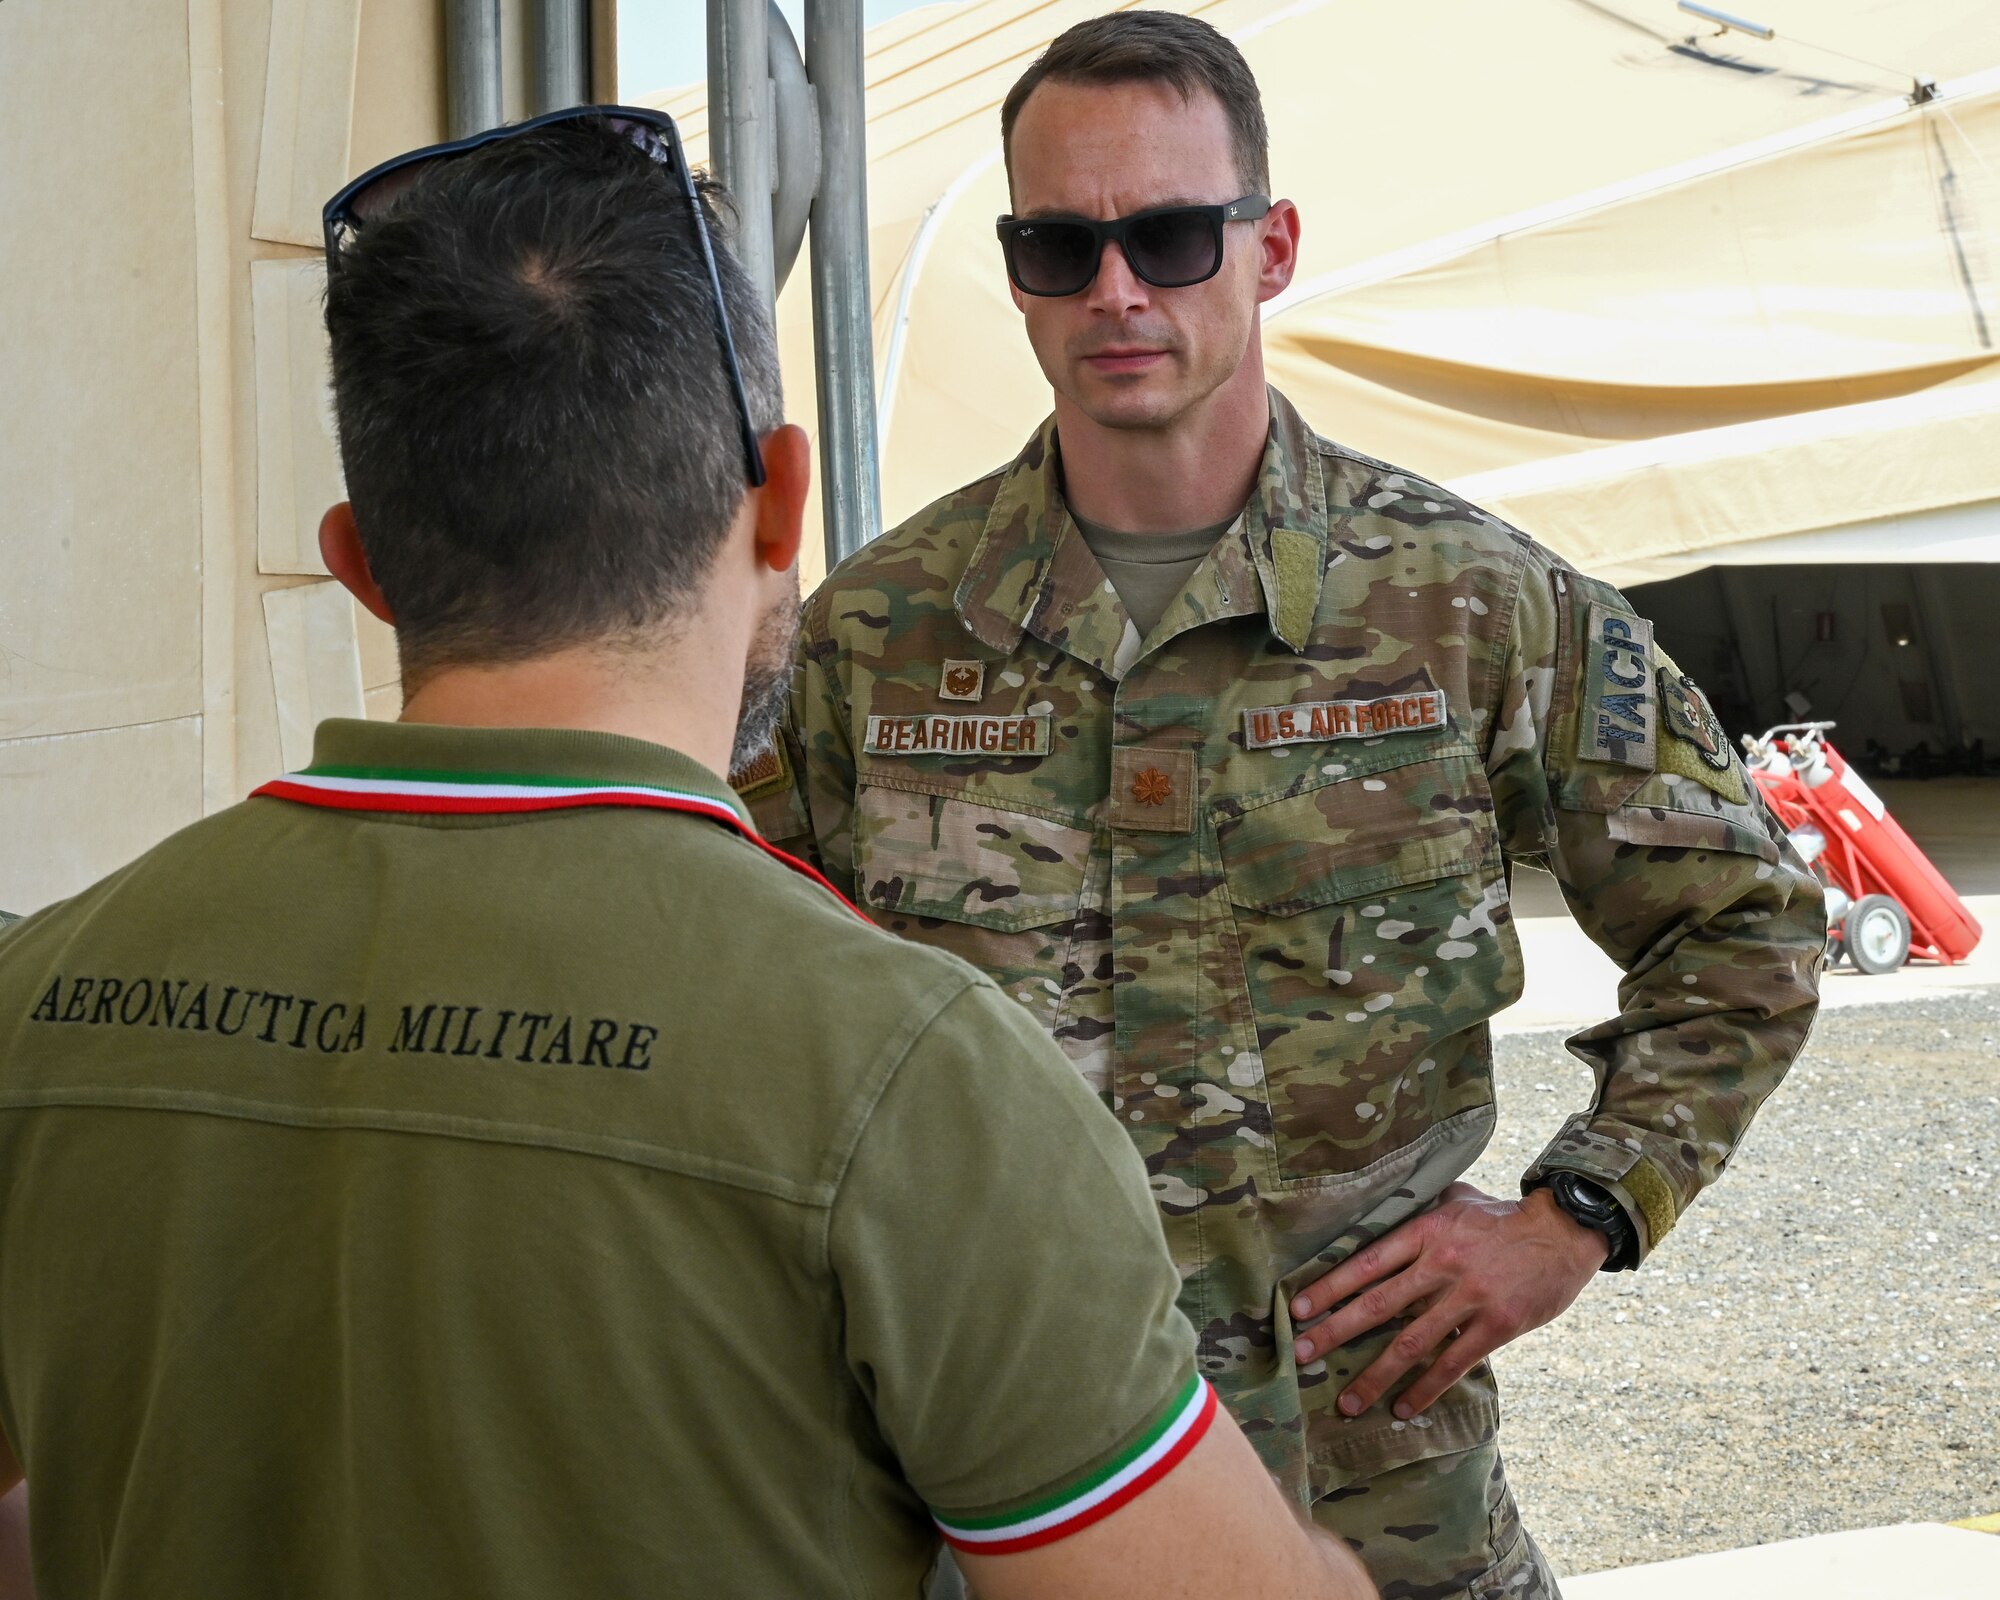 U.S. Air Force Maj. Shawn Bearinger, 82nd Expeditionary Air Support Operations Squadron, speaks with Italian Air Force Maj. Antonio D’Oria, force protection unit commander, during a tour of an Italian Air Force Eurofighter Typhoon at Ali Al Salem Air Base, Kuwait, June 22, 2023. The visit set the stage for cooperation between the 82nd EASOS and the ITAF. Collaborations like these happen everyday and they help secure our position as CENTCOM’s premier coalition combat enabler. (U.S. Air Force photo by Staff Sgt. Breanna Diaz)